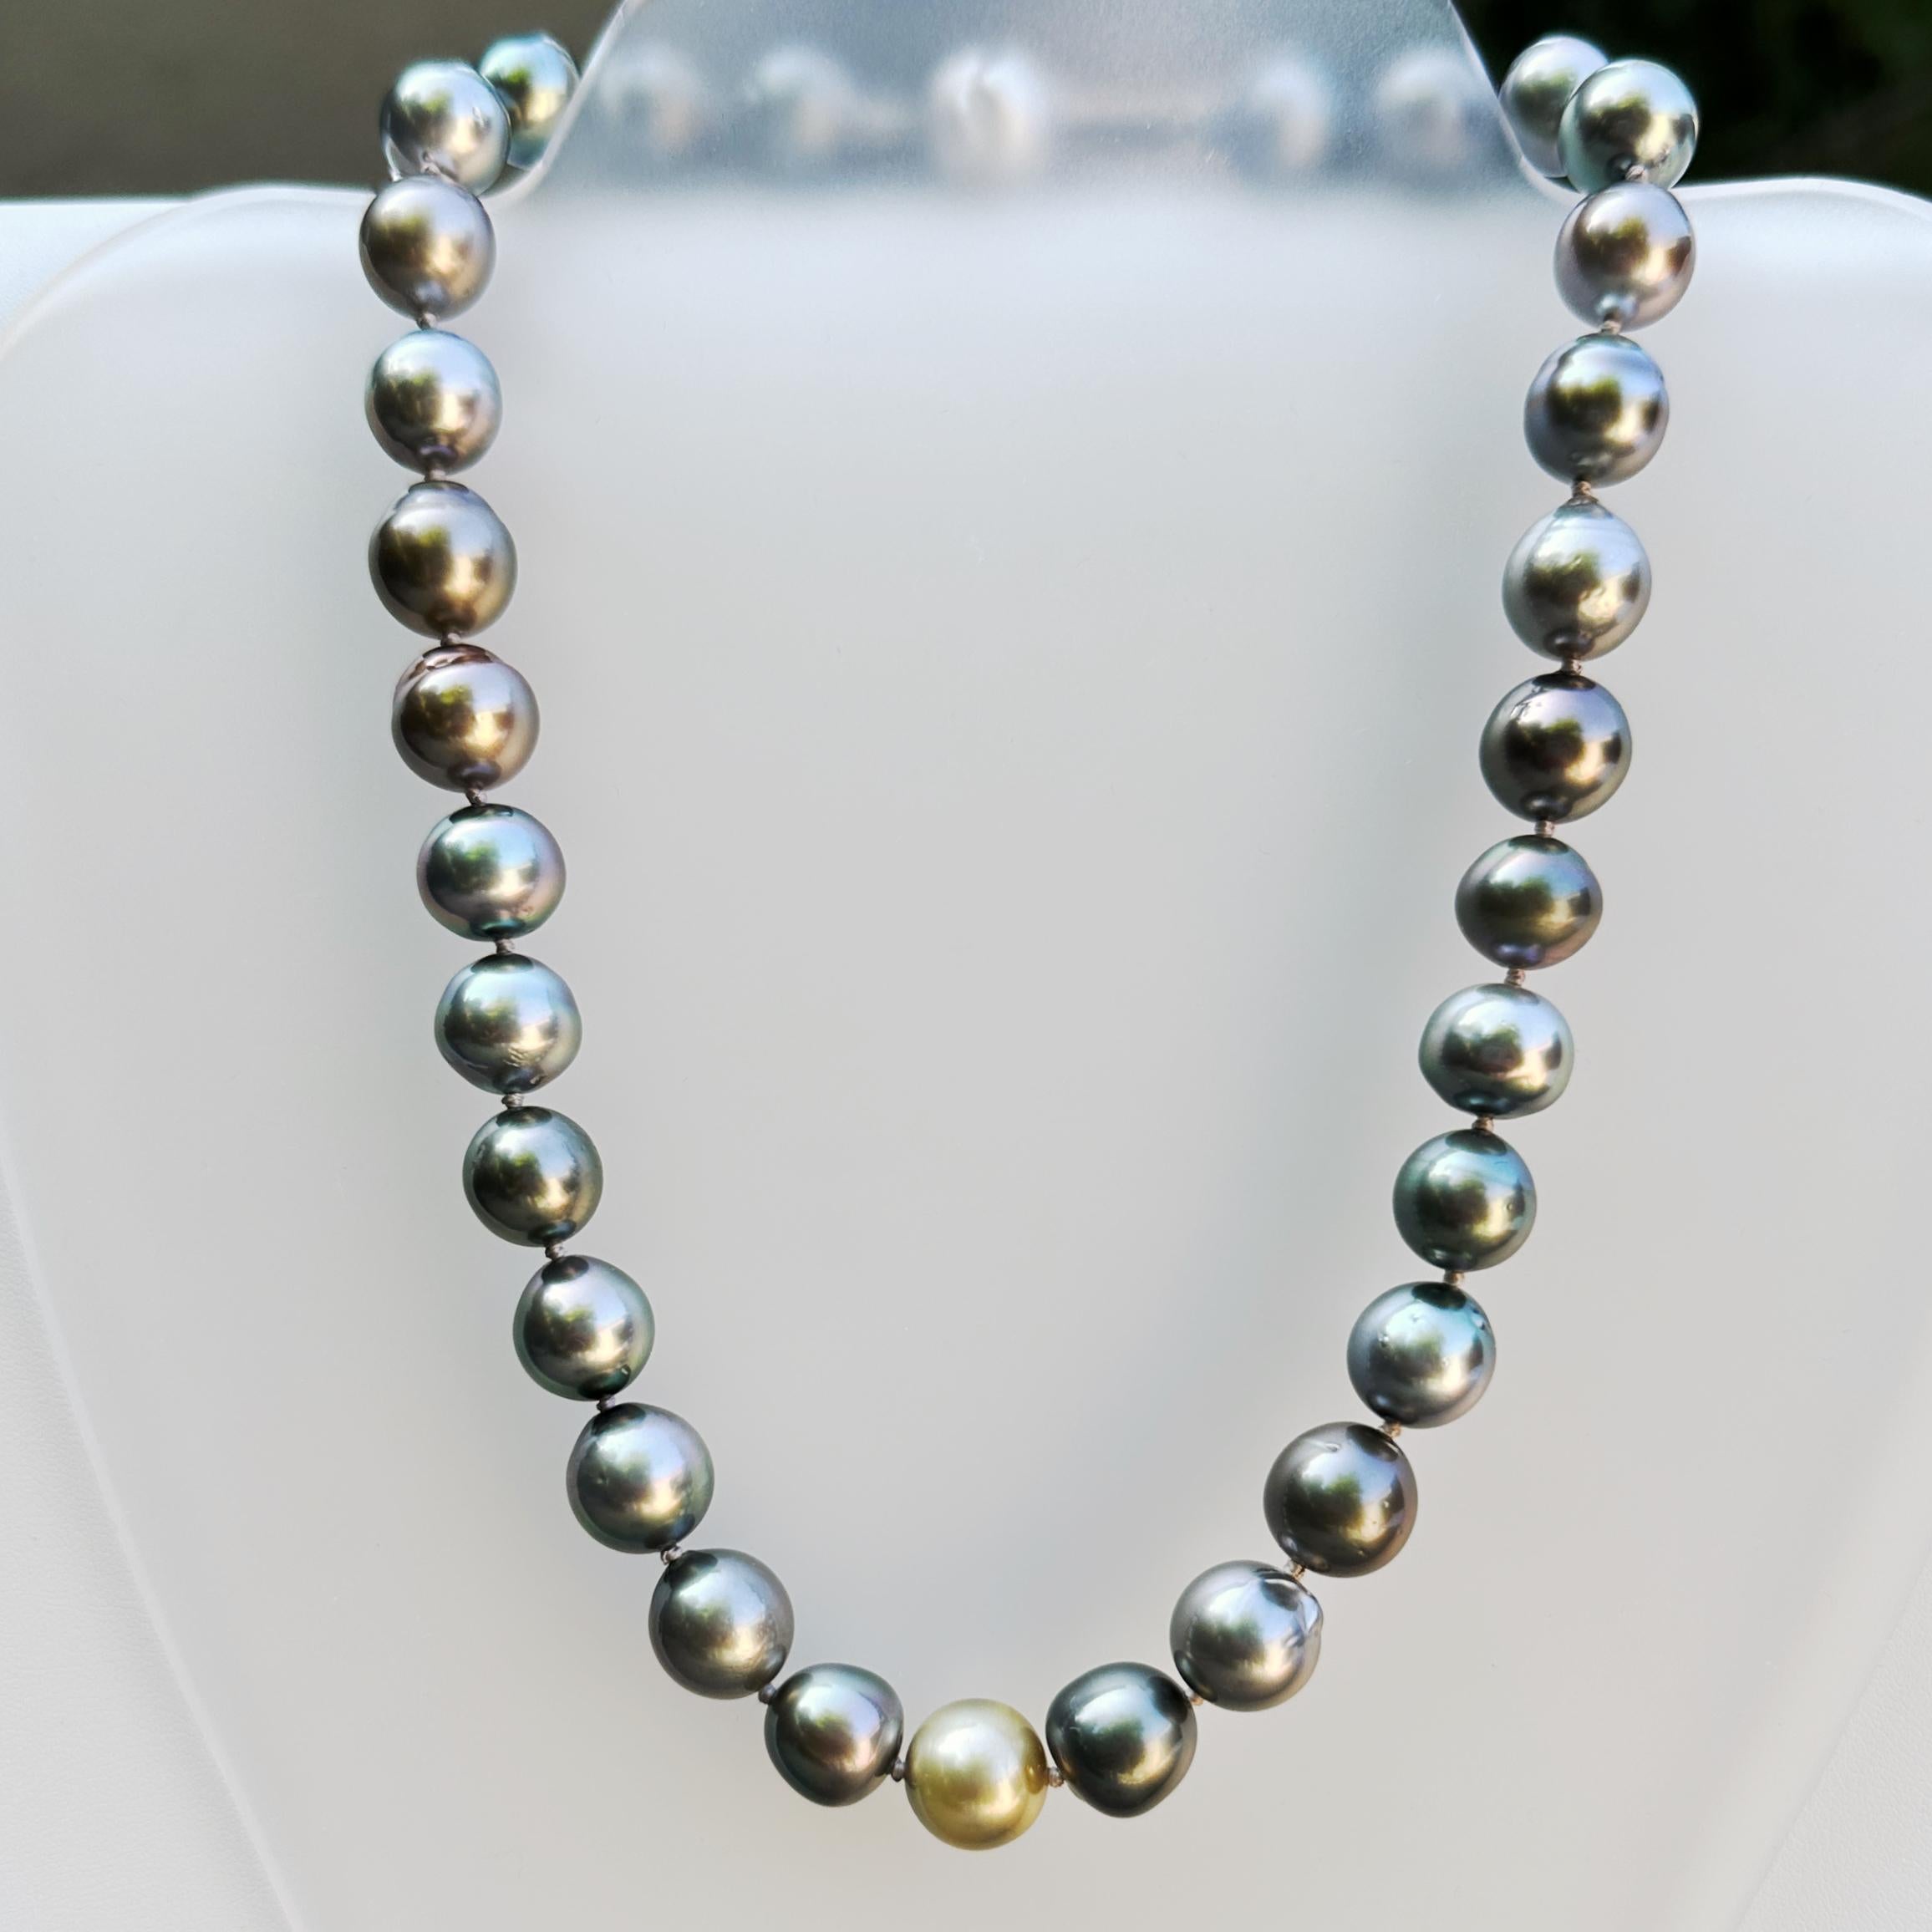 Choker-Length Strand of 11.5mm Tahitian Pearls w White Gold & Diamond Ball Clasp For Sale 6